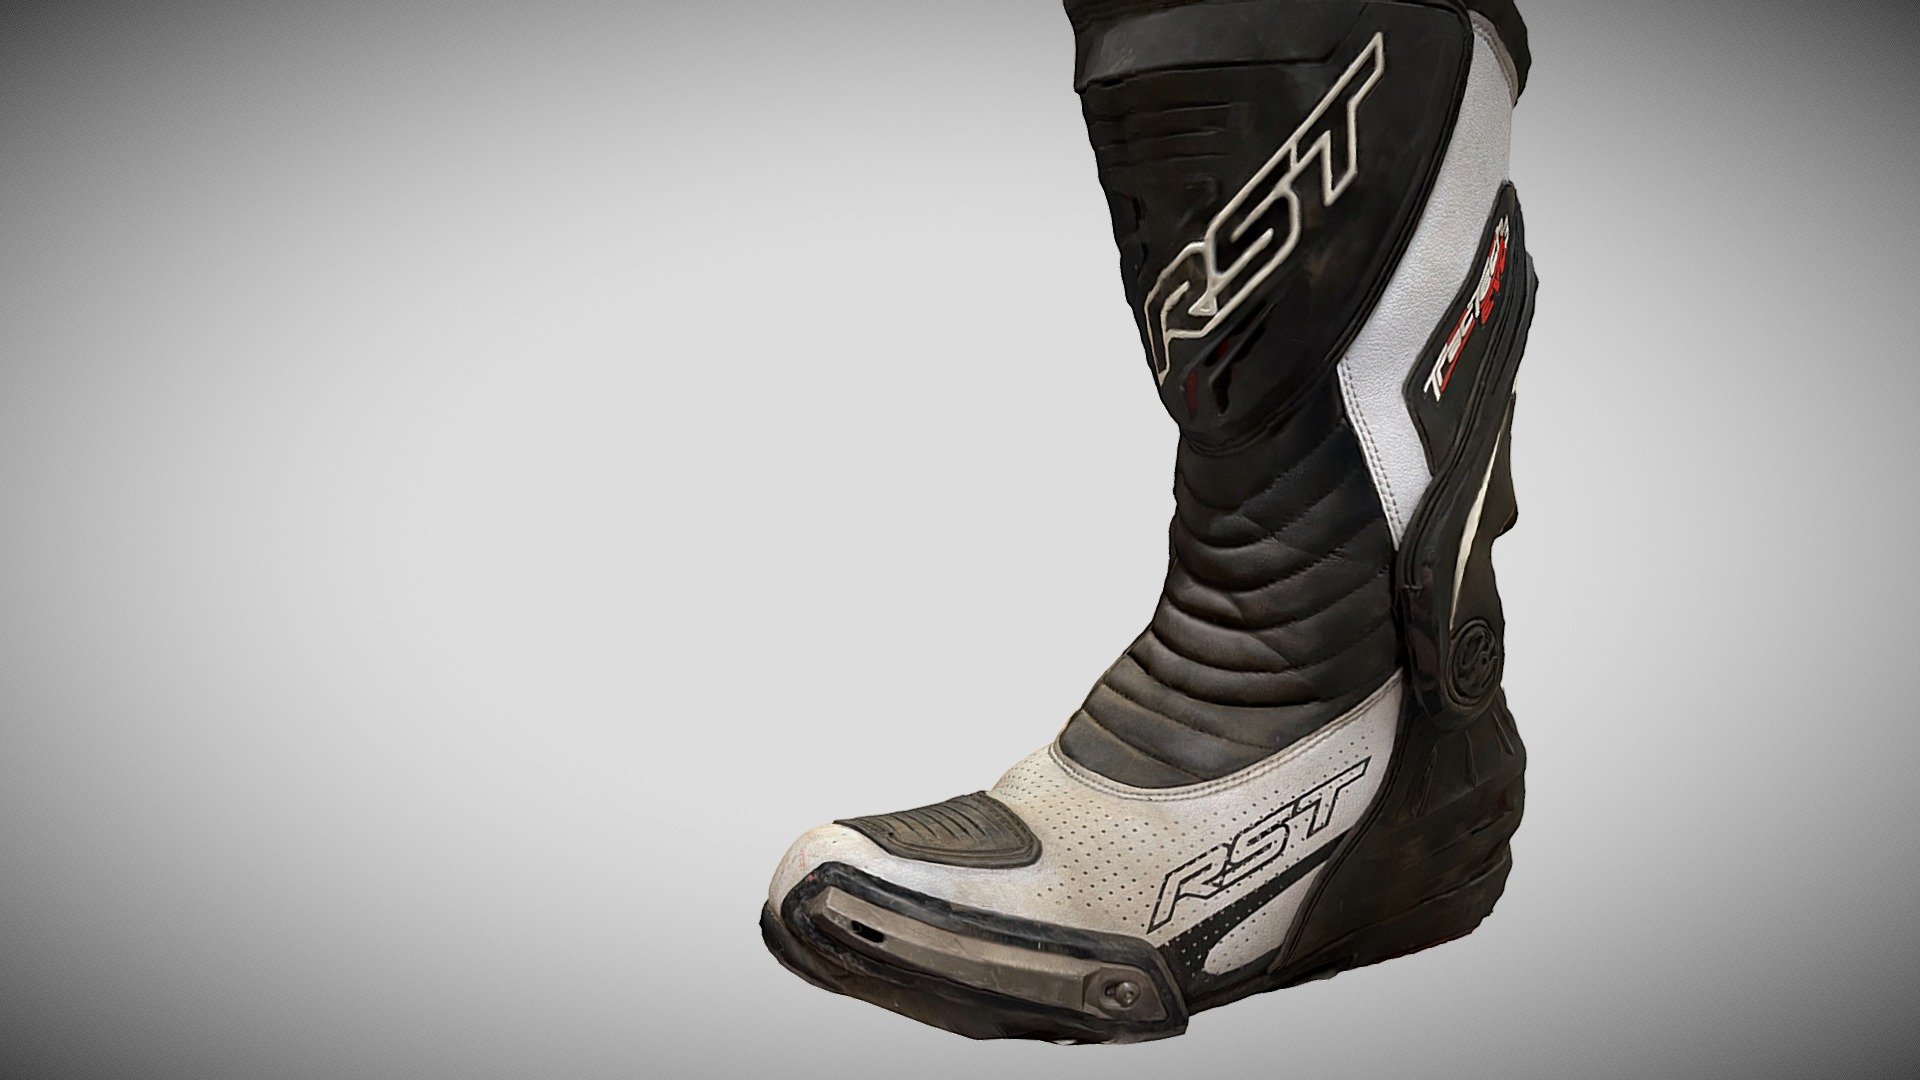 Please visit my link tree to see all my social media links https://linktr.ee/alexharvey

RiVR is a production studio specialising in photorealistic VR training and scanning of real world environments. www.rivr.uk to view all our products

thanks and hope you like the photogrammetry models .

photogrammetry - Motorcycle boots leather - Buy Royalty Free 3D model by alex.harvey 3d model